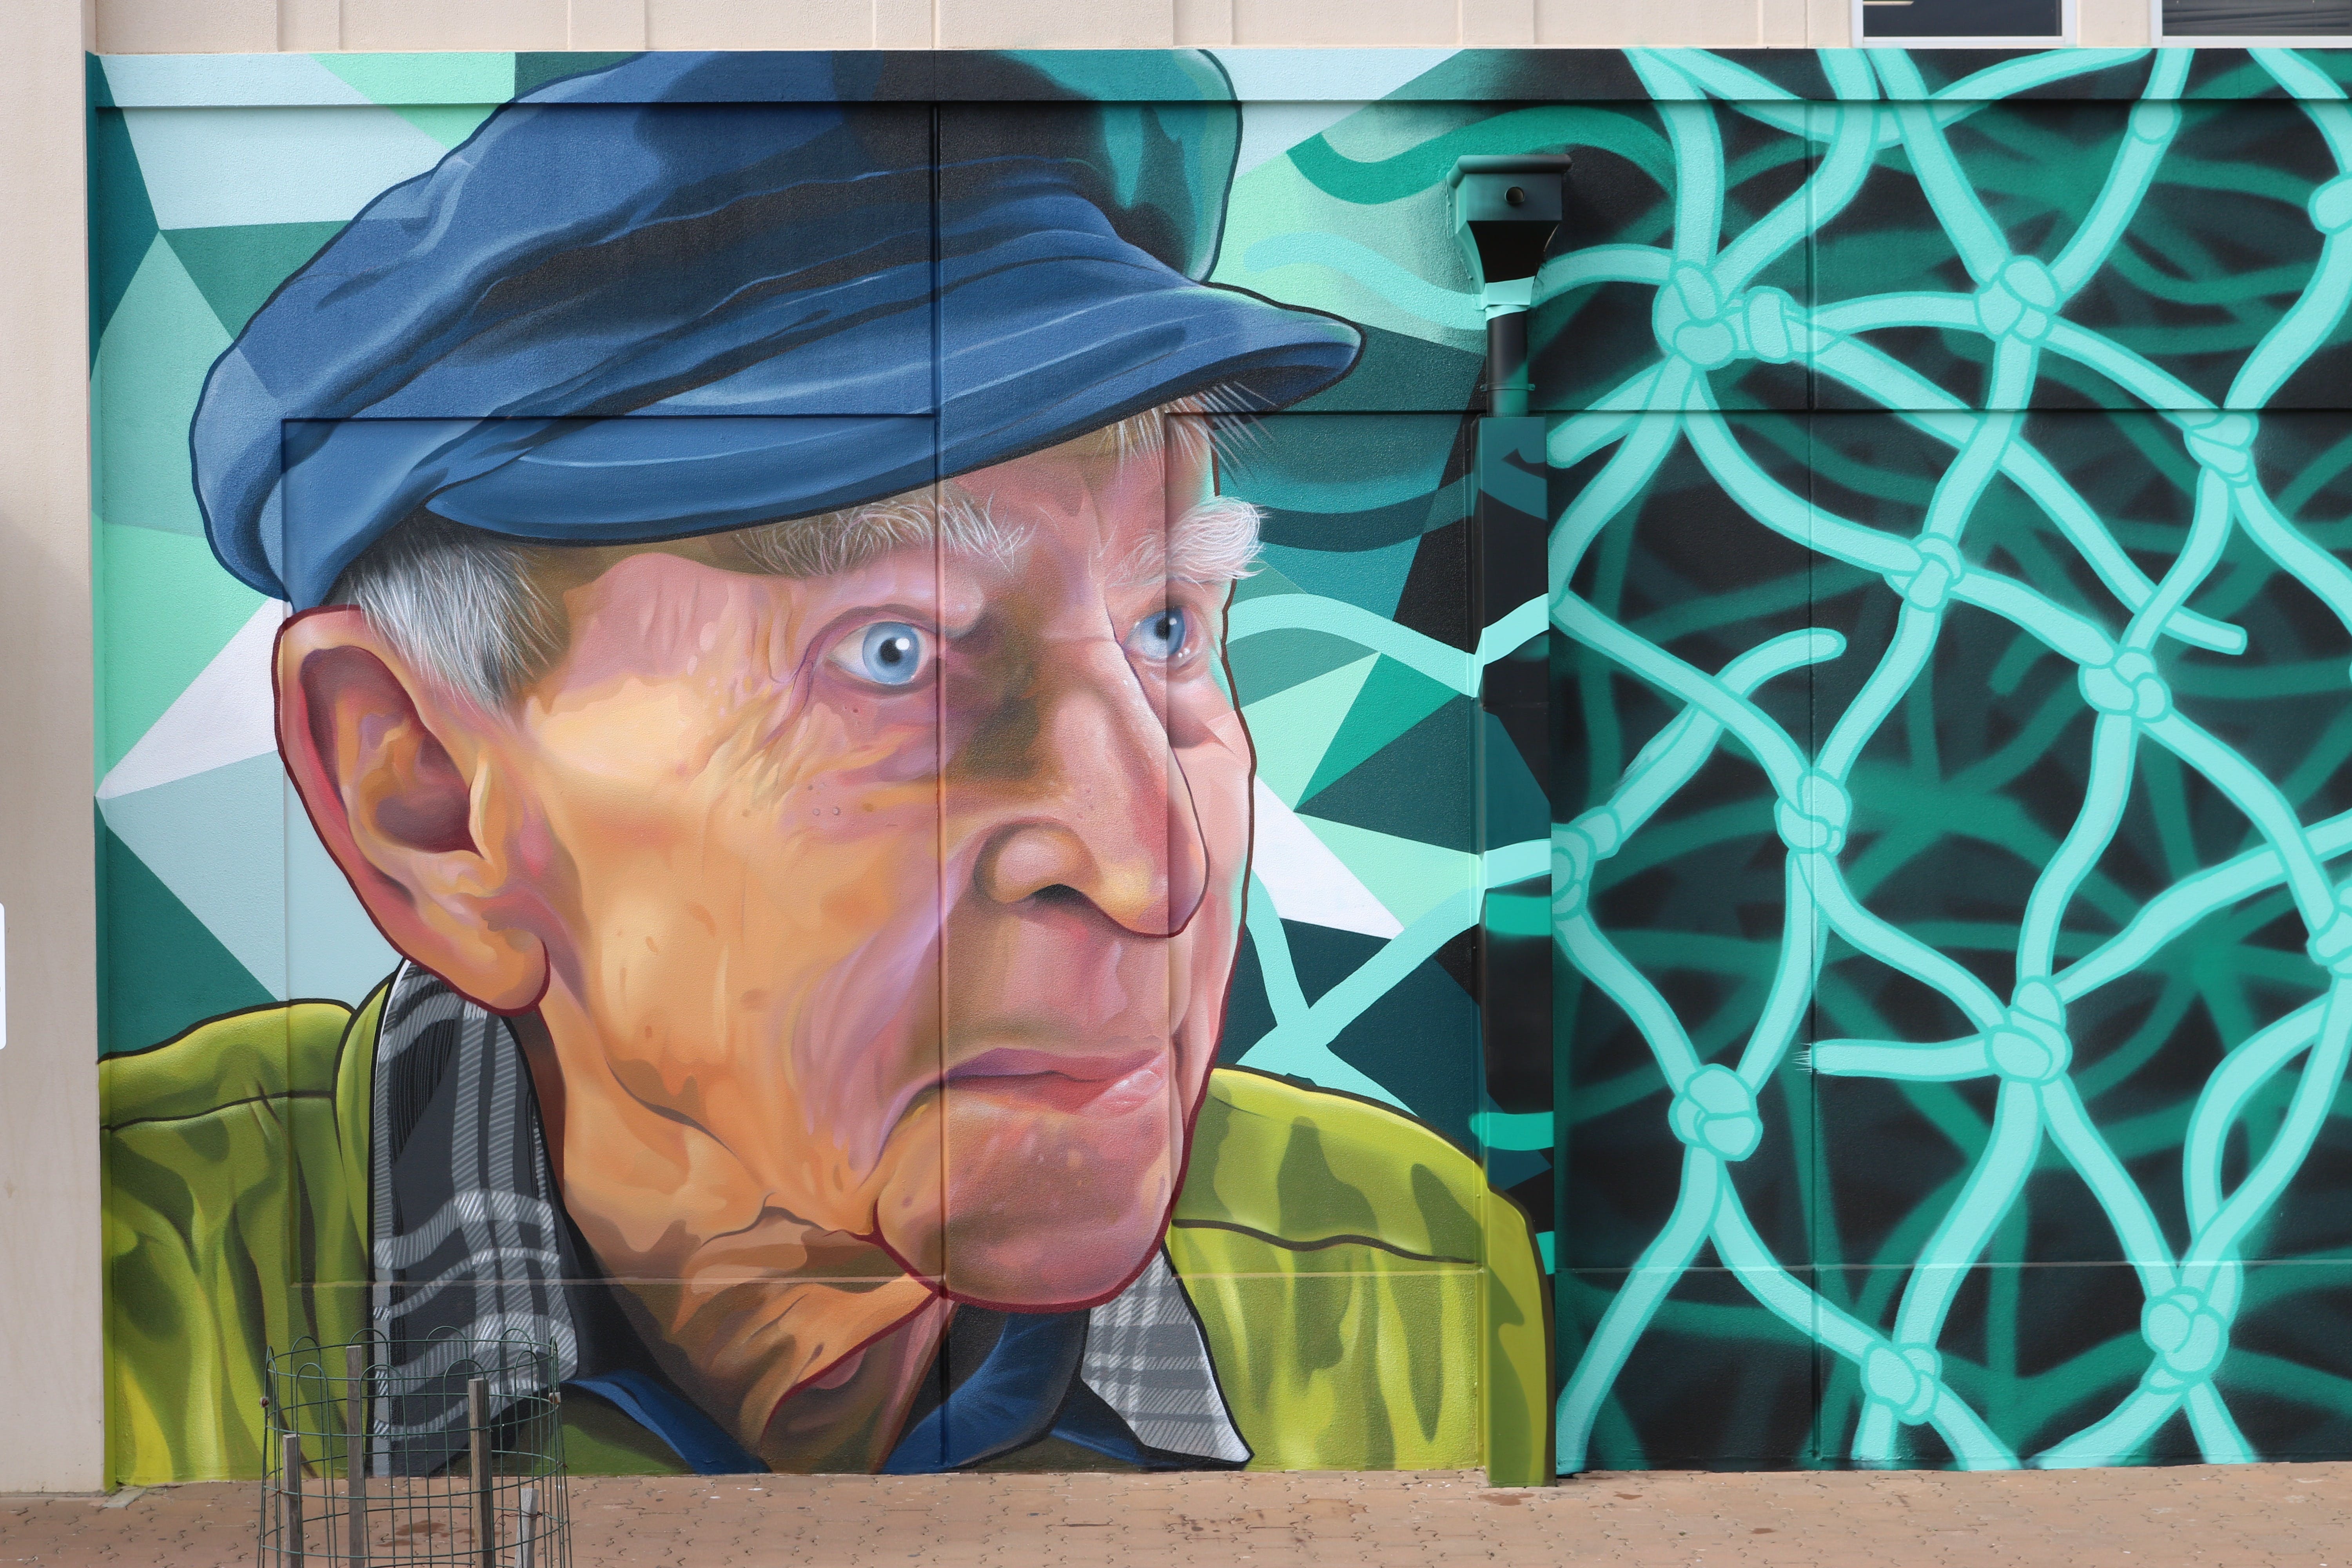 Port Pirie Mural Trail - Attractions Sydney